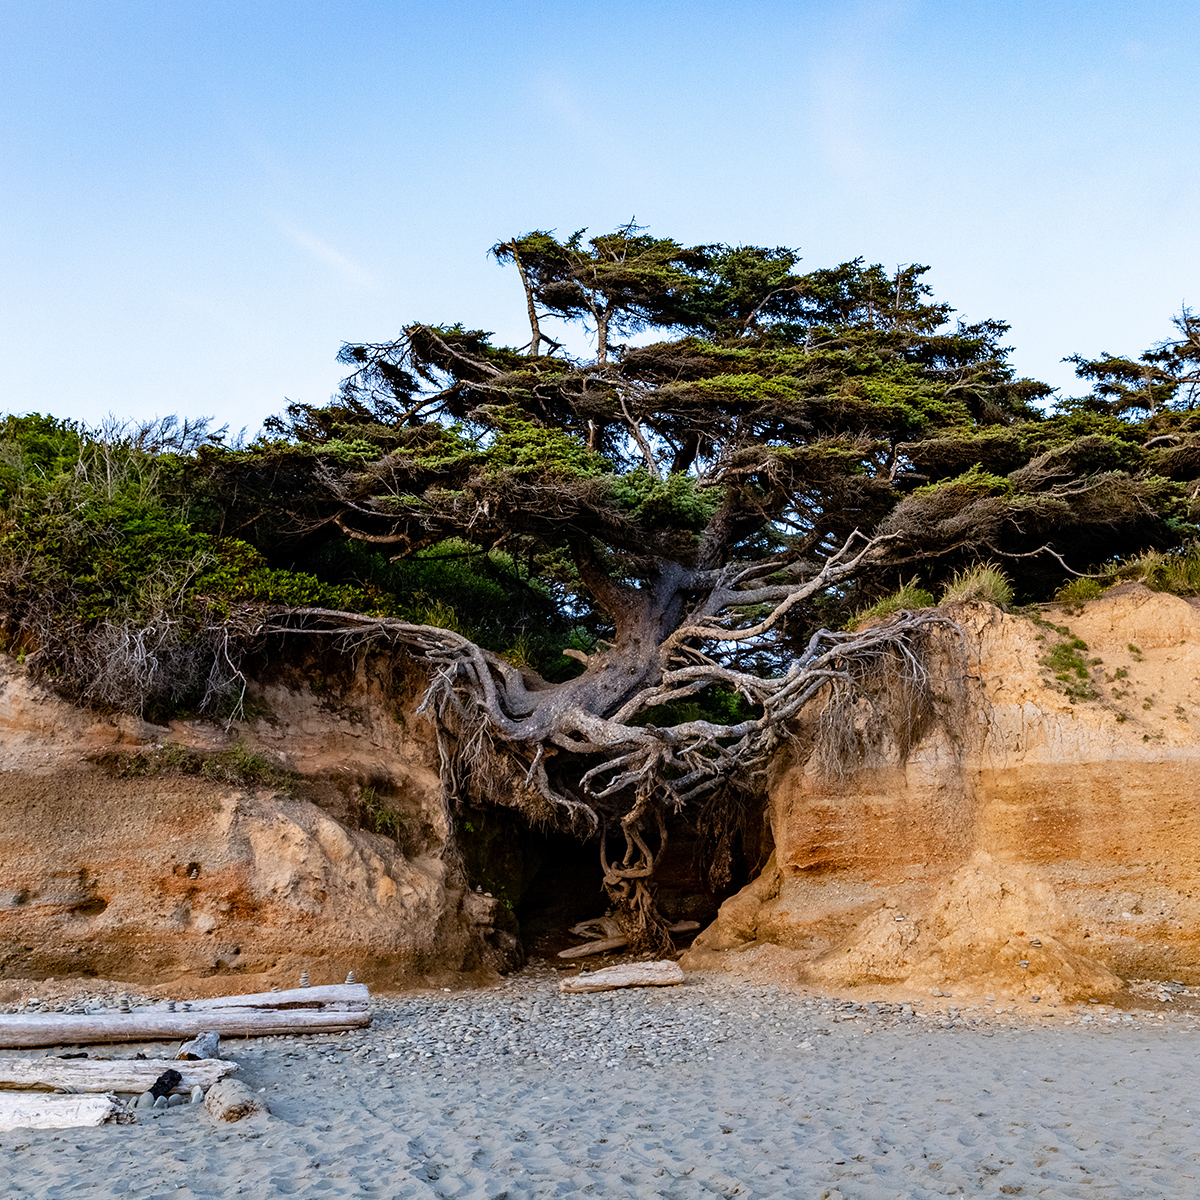 The Kalaloch Tree of Life in Olympic National Park will leave you speechless. This natural wonder is suspended in air over a parted cliff with most of its roots exposed. 

This Sitka spruce shows us that we are capable of so much more, and that nature is breathtaking.